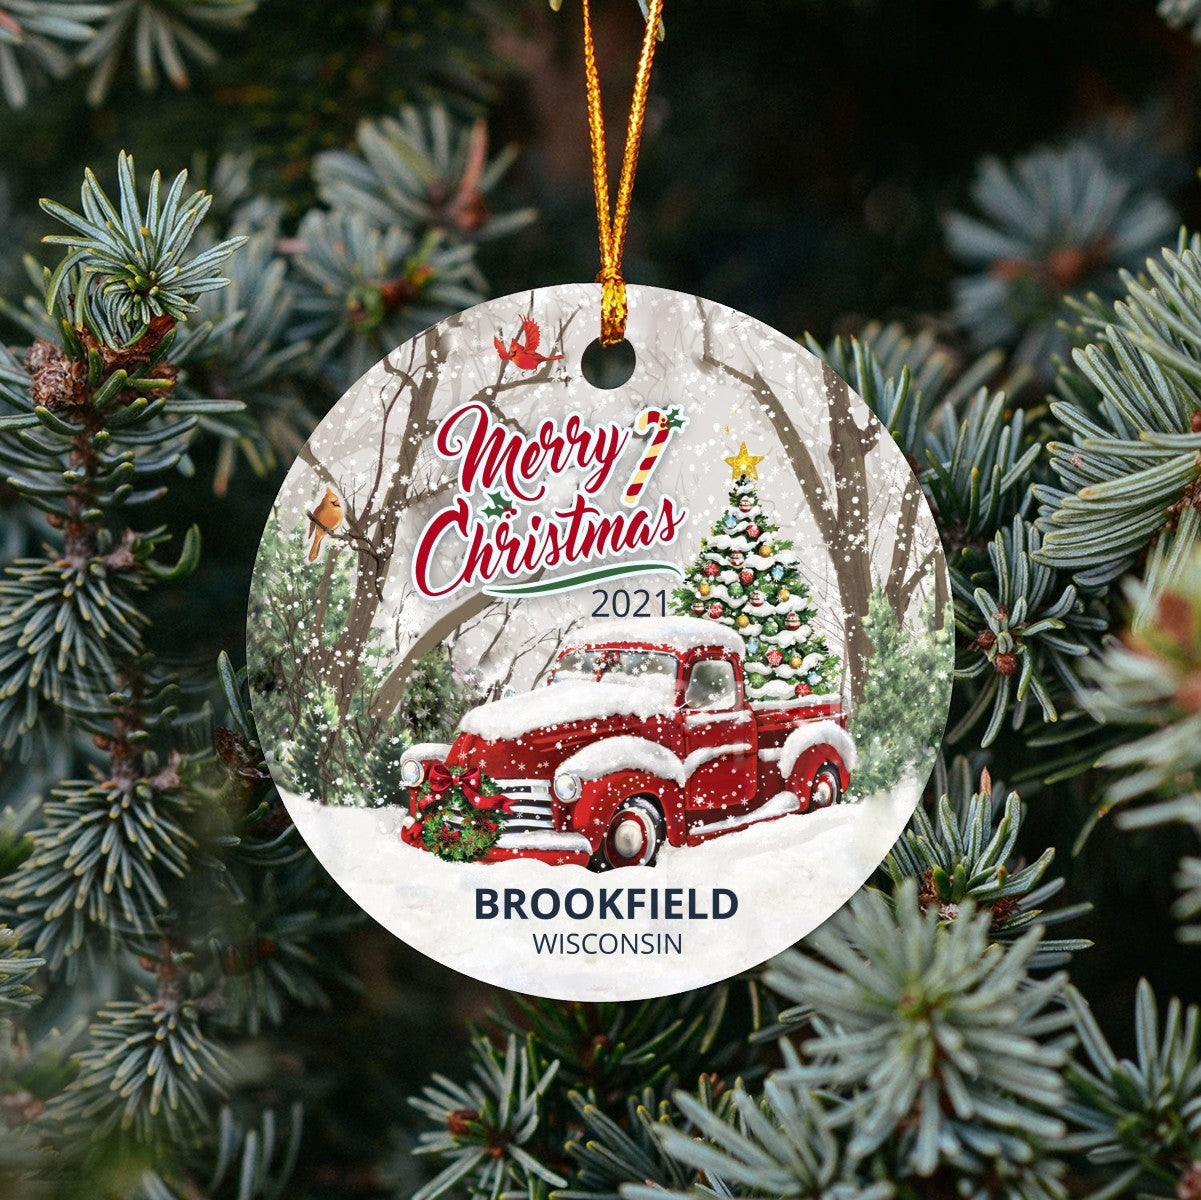 Christmas Tree Ornaments Brookfield - Ornament Customize With Name City And State Brookfield Wisconsin WI - Red Truck Xmas Ornaments 3'' Plastic Gift For Family, Friend And Housewarming